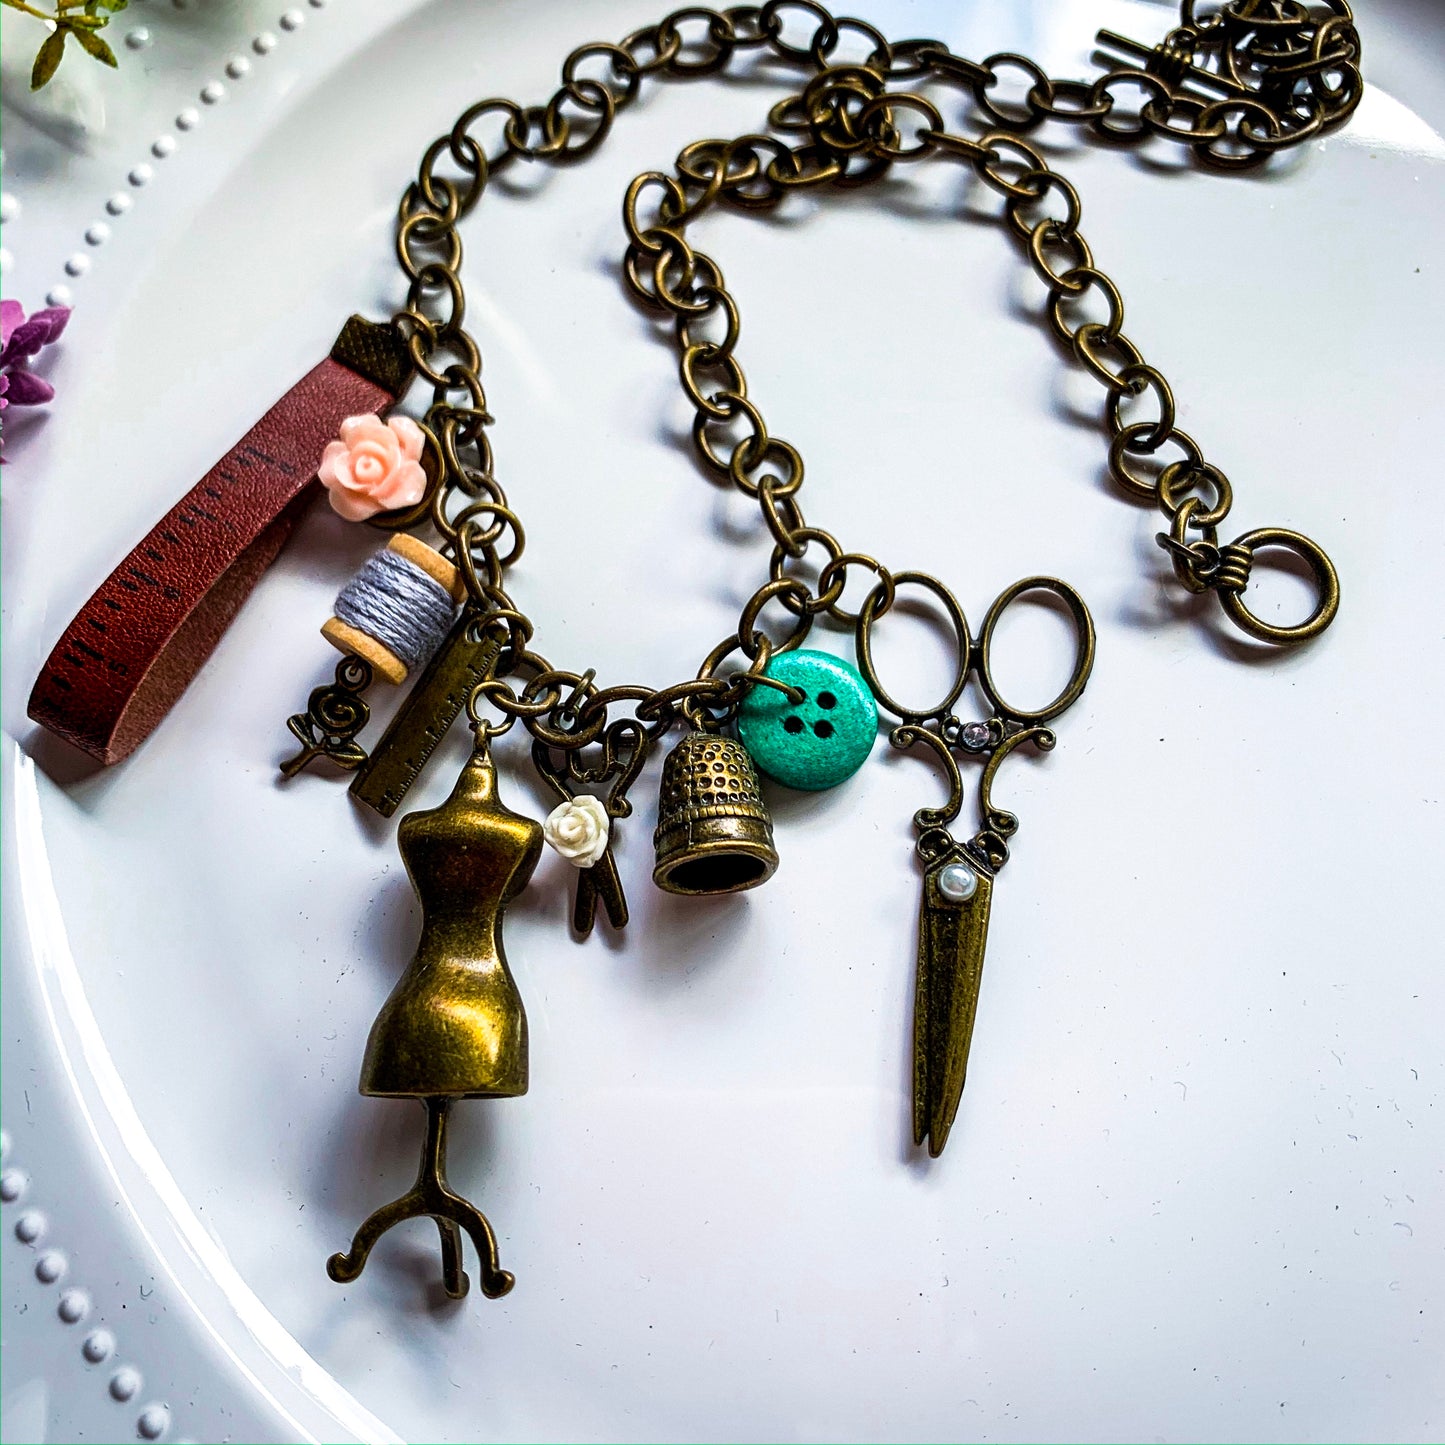 Seamstress Charm Necklace